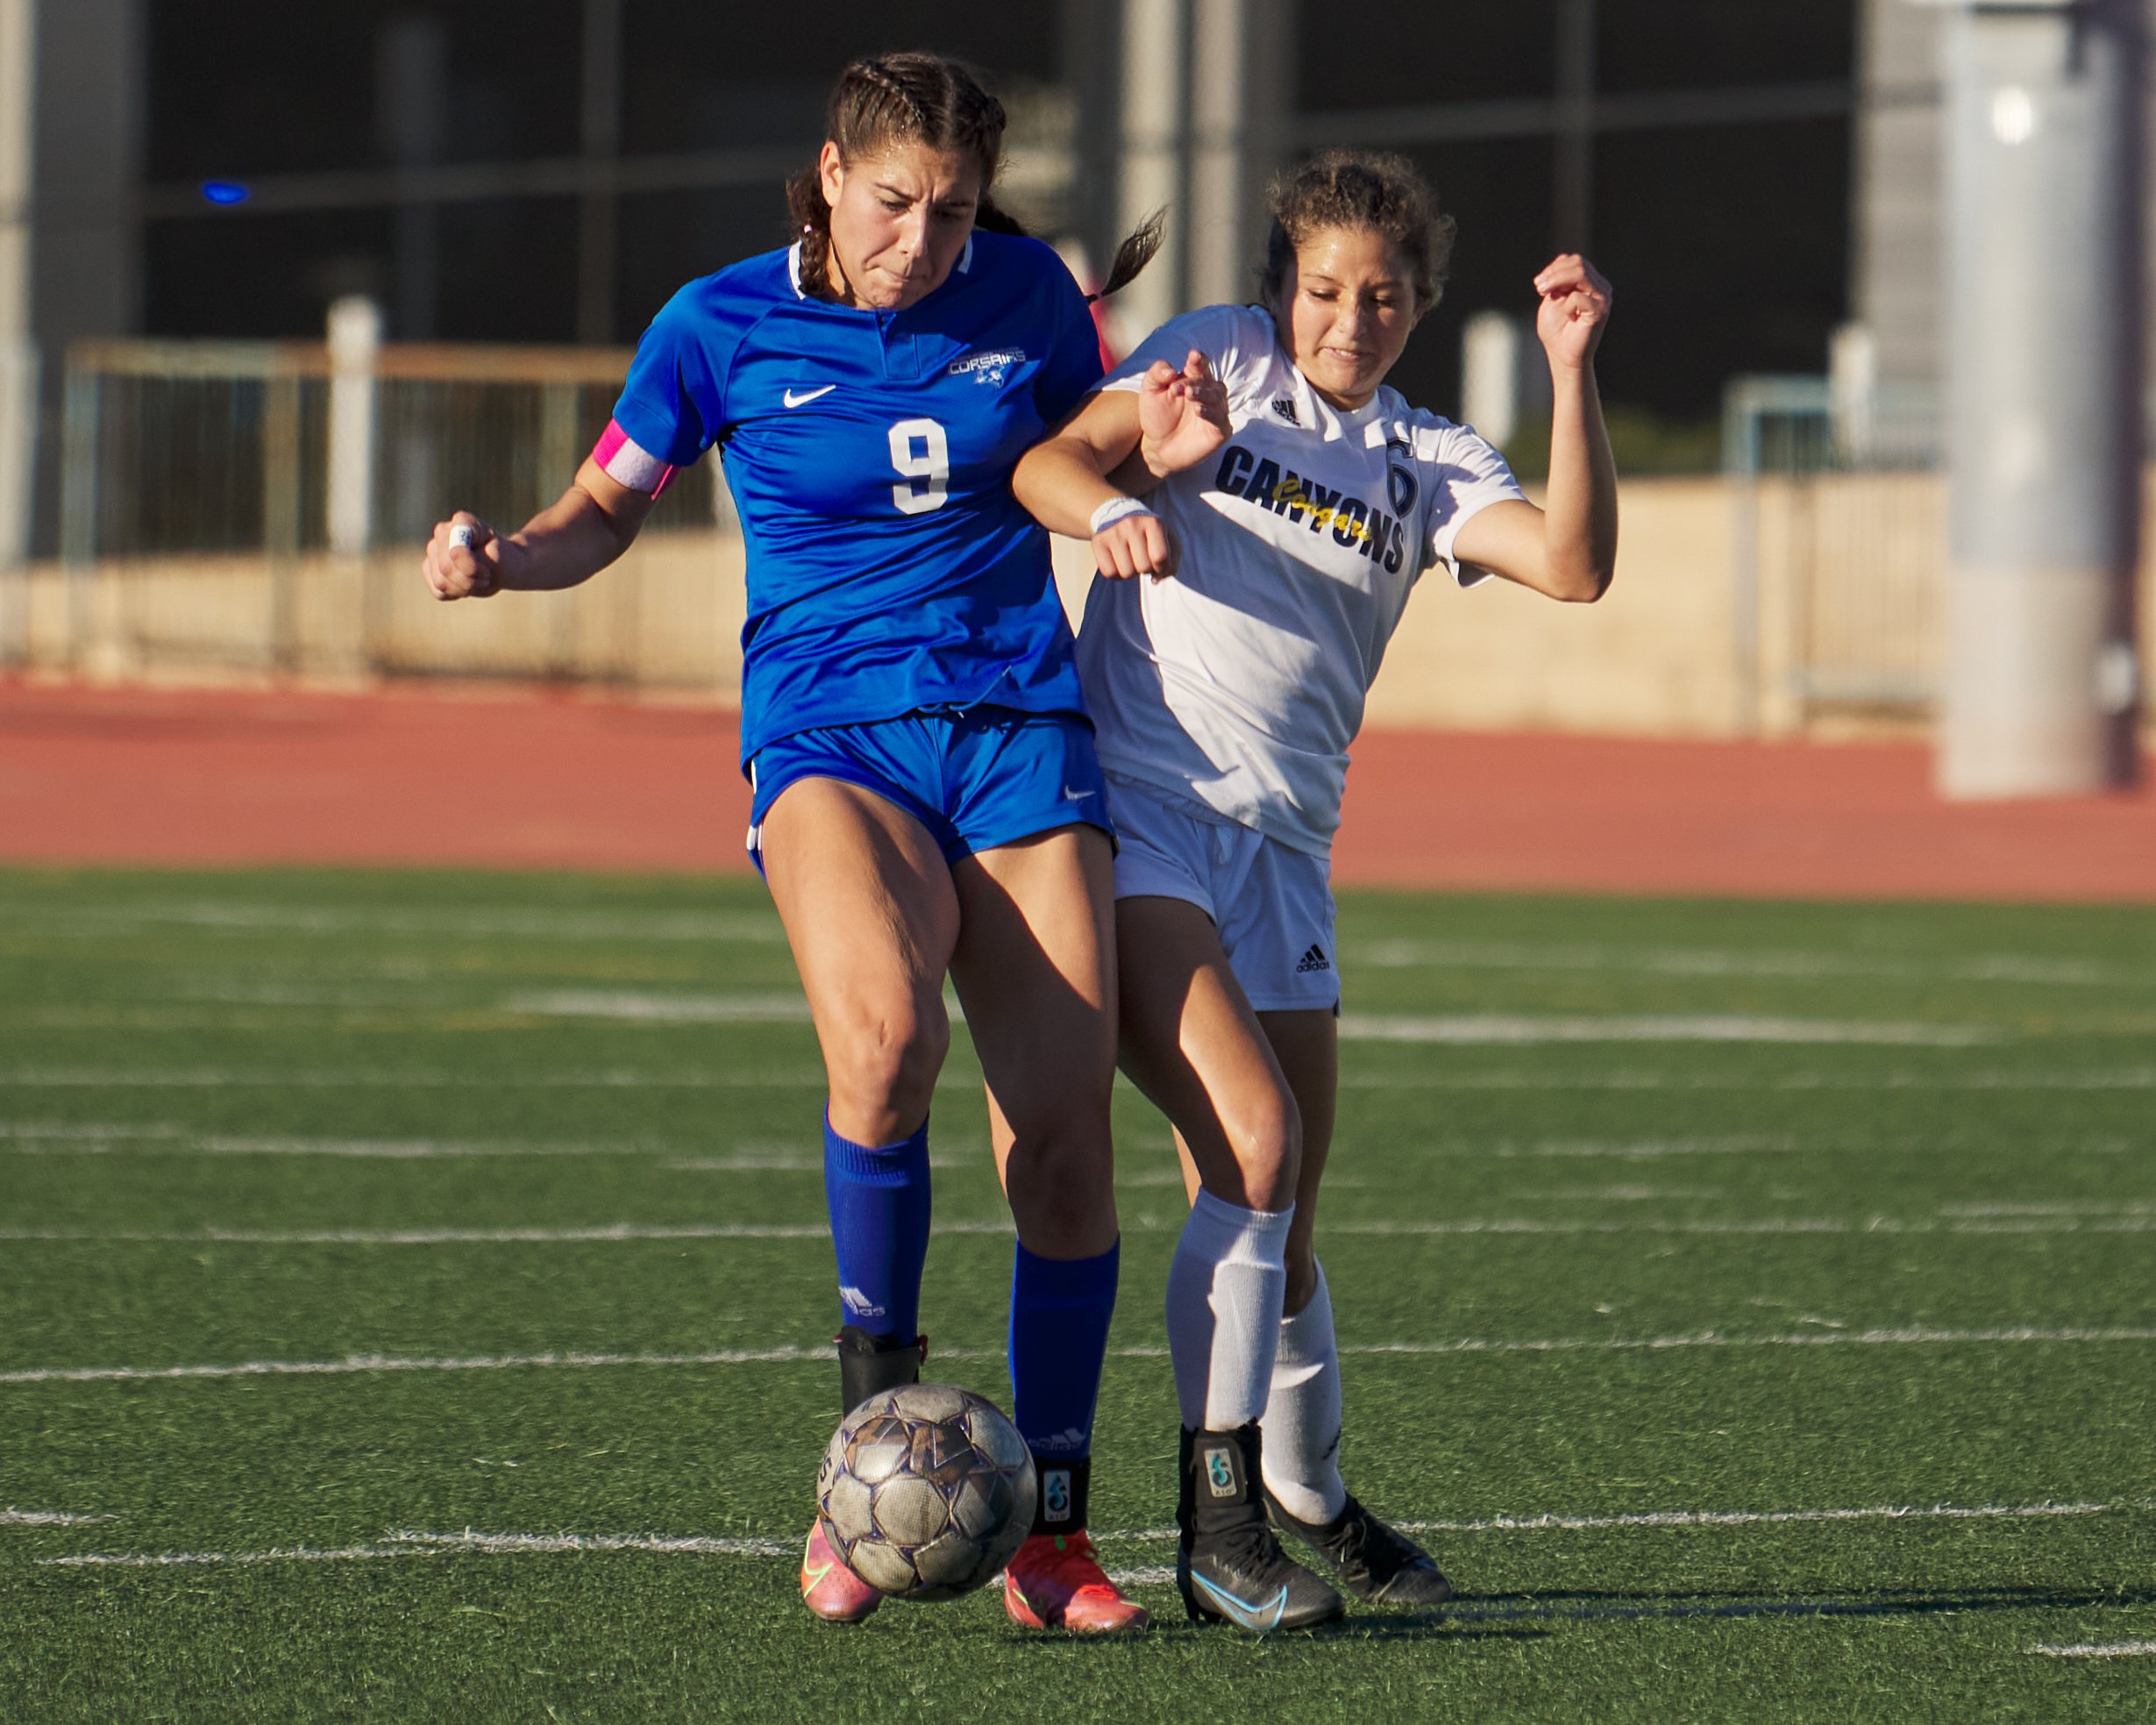  Santa Monica College Corsairs' Alexia Mallahi and College of the Canyons Cougars' Ryan Shepherd during the women's soccer match on Thursday, Nov. 10, 2022, at Corsair Field in Santa Monica, Calif. The Corsairs lost 3-0. (Nicholas McCall | The Corsai